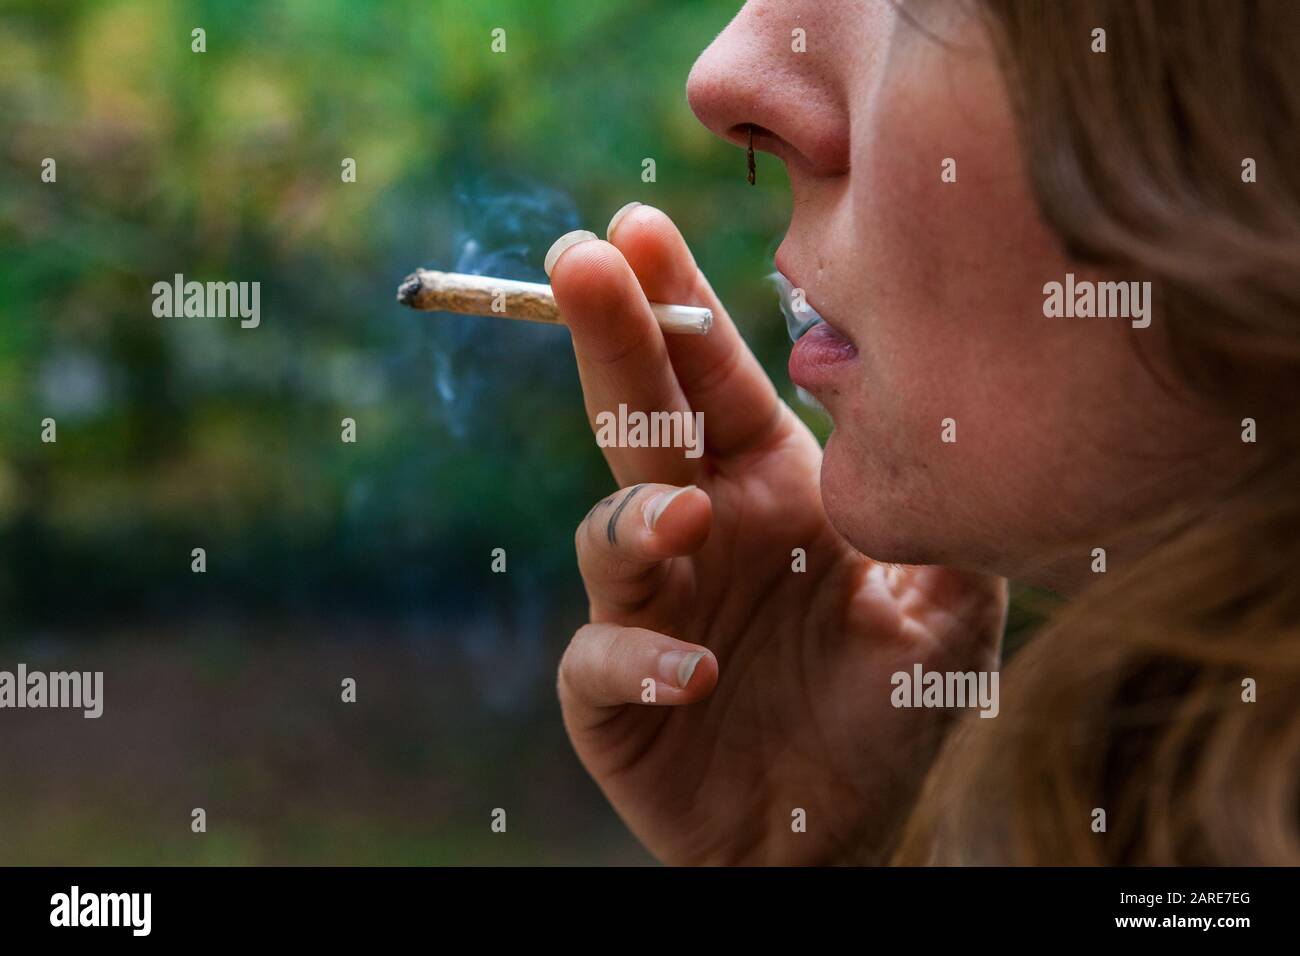 Closeup shot of lower half of caucasian woman's face smoking hand rolled marijuana joint. the freshly lit cannabis cigarette held between her two fingers.  Stock Photo